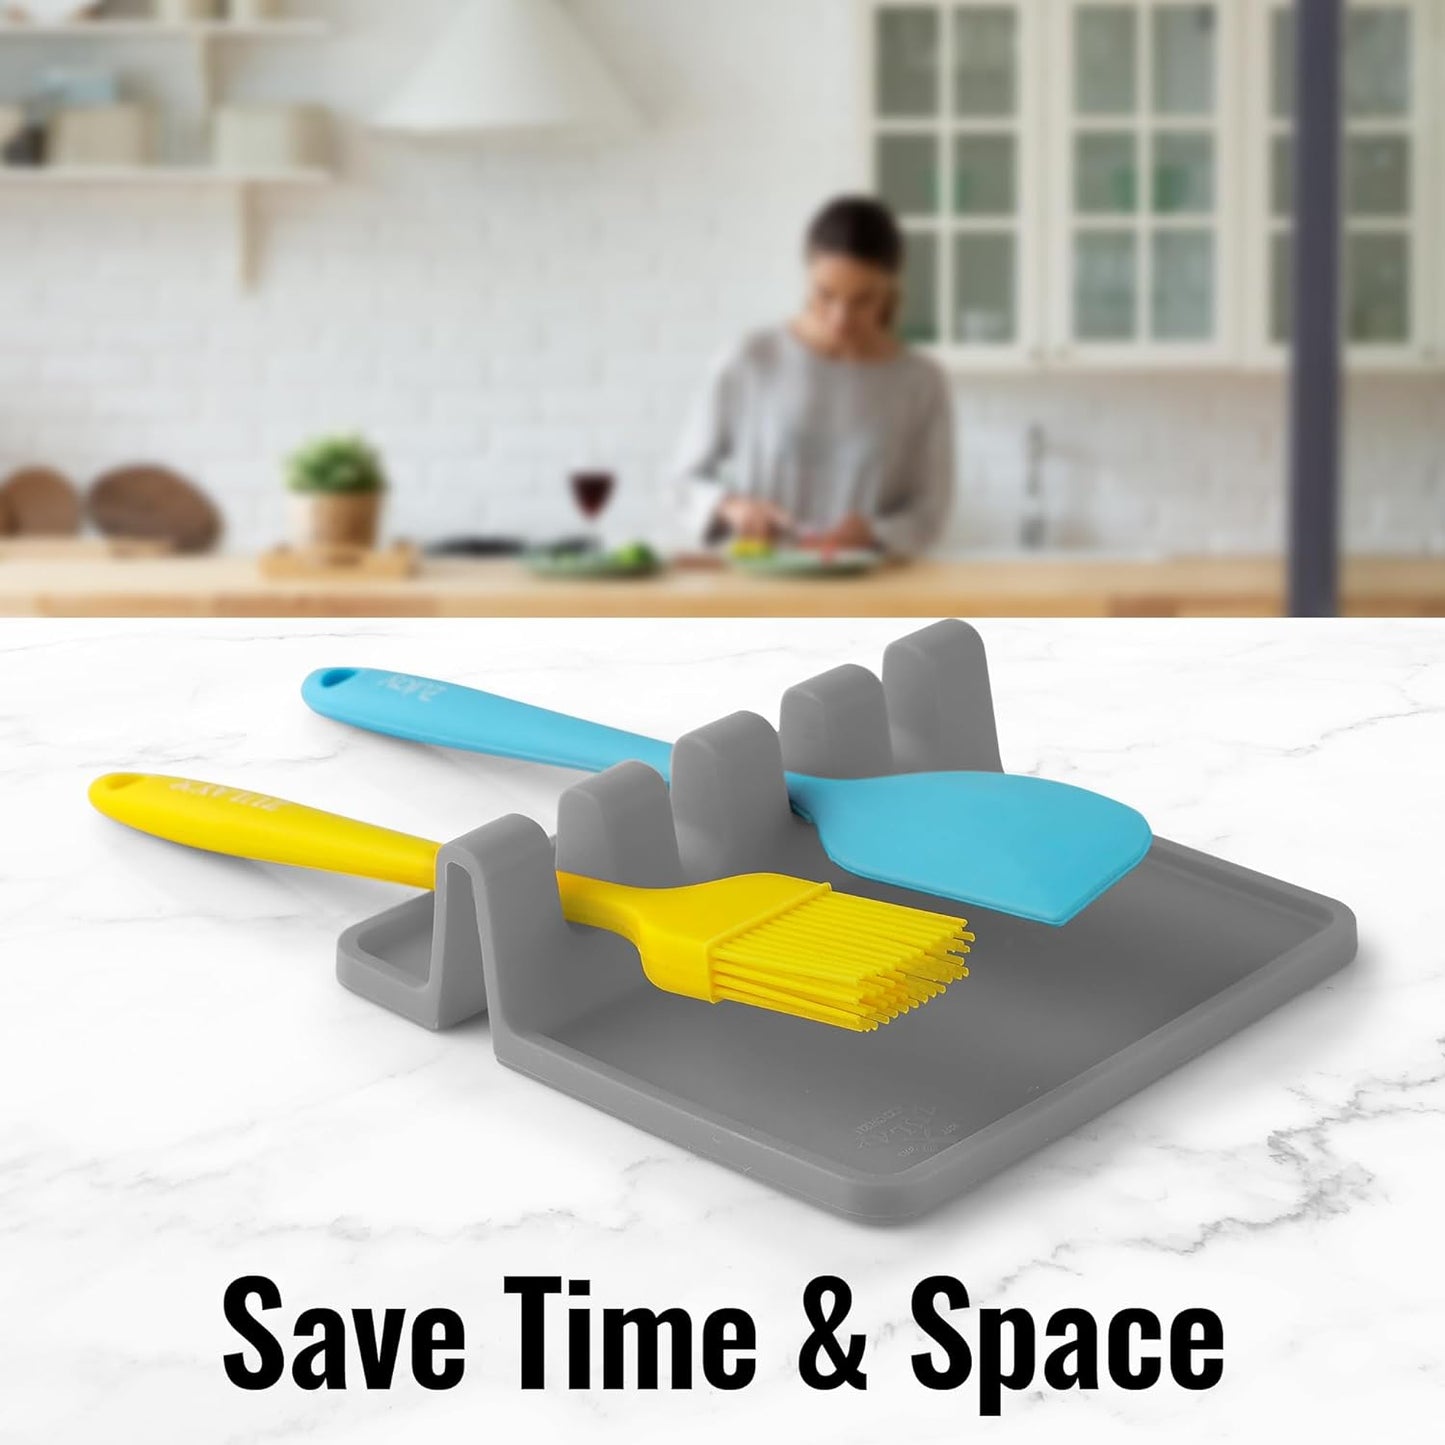 Extra Large Silicone Utensil Rest with Drip Pad for Multiple Utensils - Bpa-Free Heat-Resistant Spoon Rest & Spoon Holder for Stove Top - Kitchen Utensil Holder for Spoon - Gray